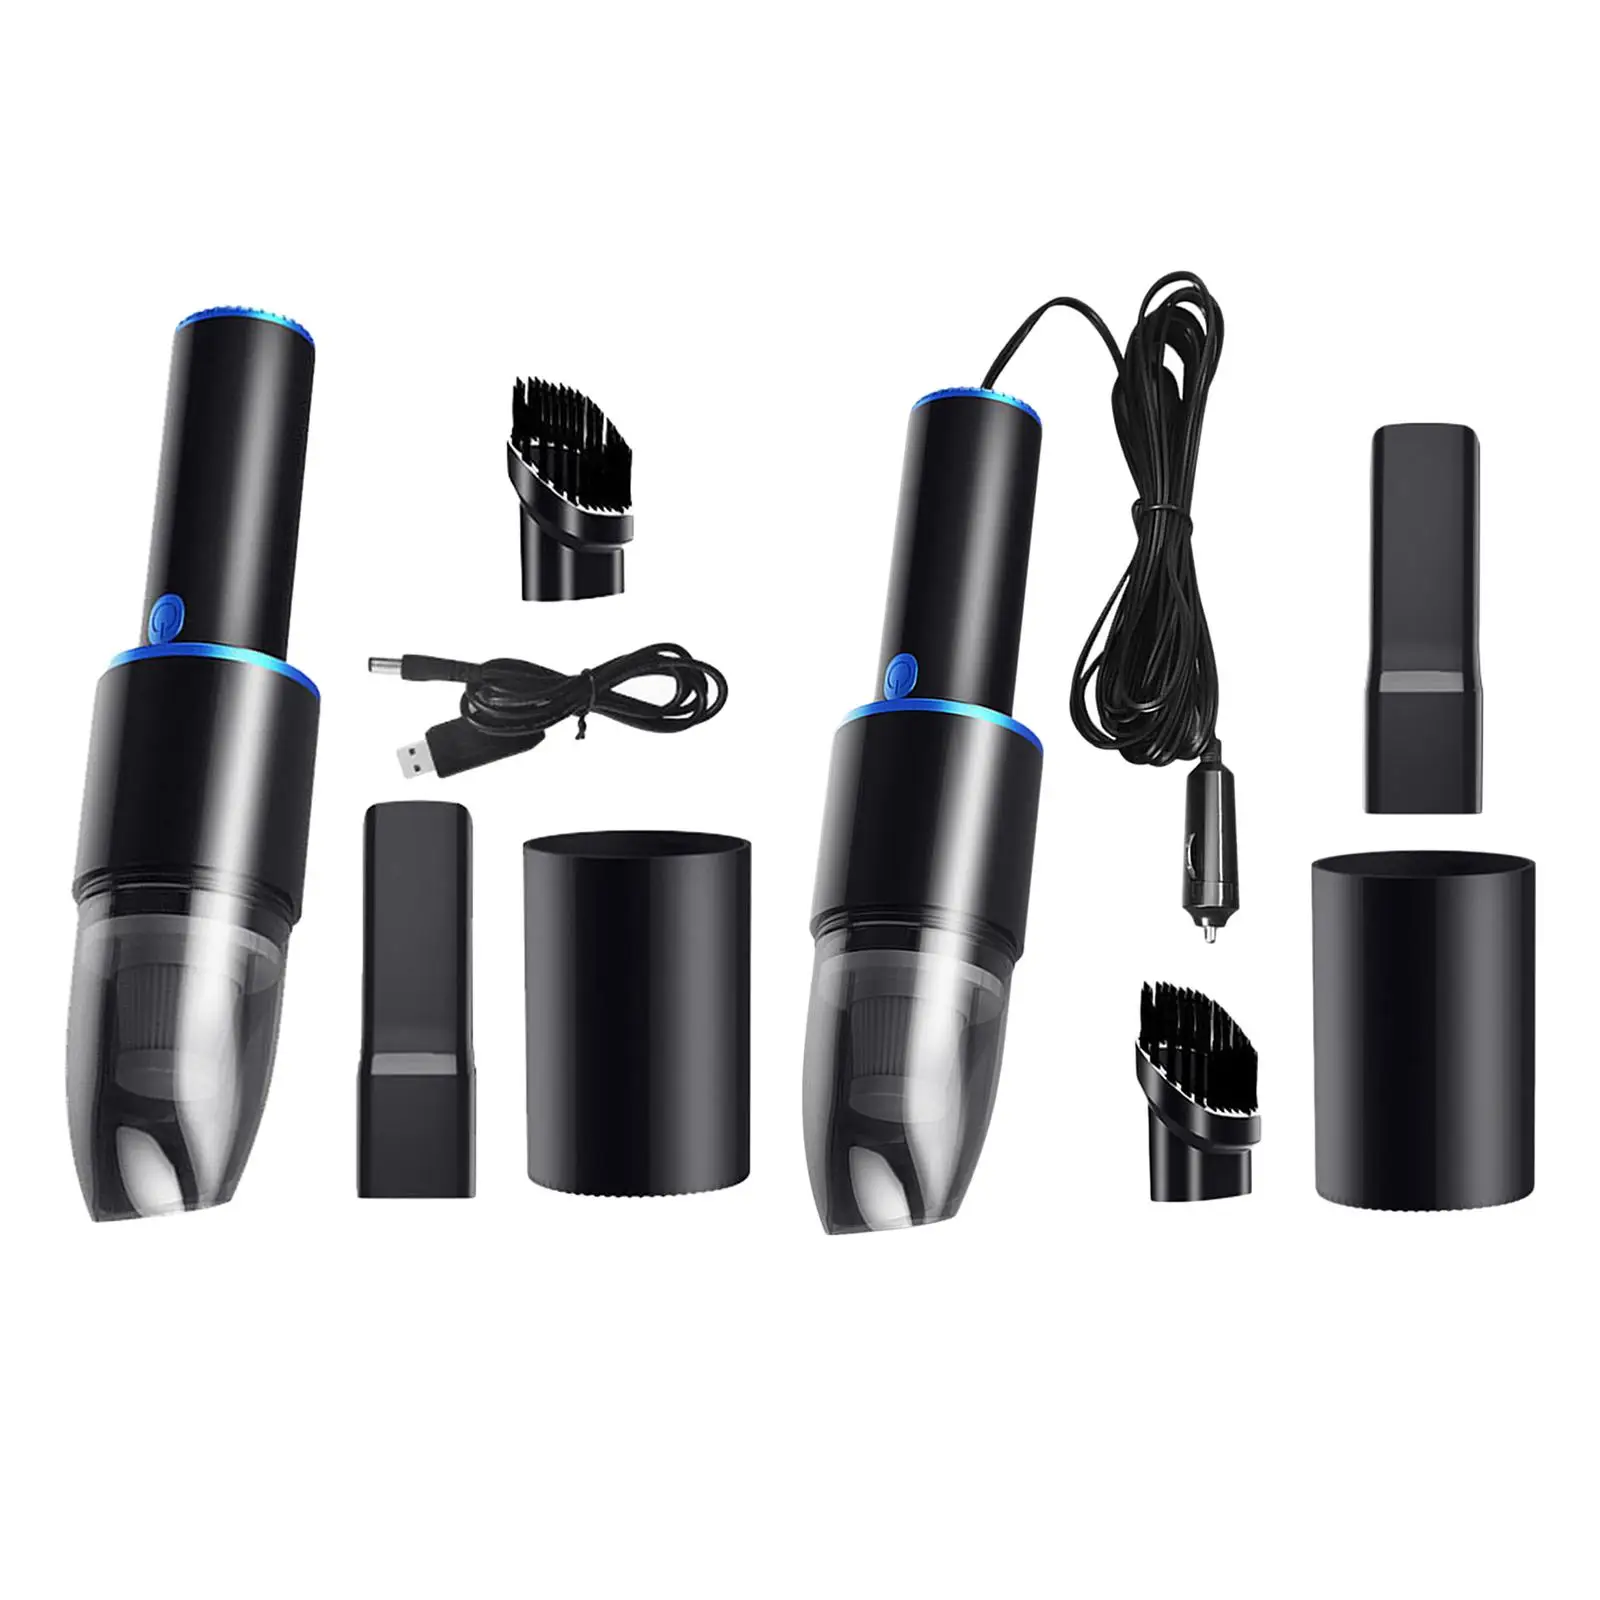 Handheld Car Vacuum Cleaner 10000PA Low Noise Vacuum Cleaning 2 Nozzles CyclSuction Fit for Home Use Chairs Seats Supplies 